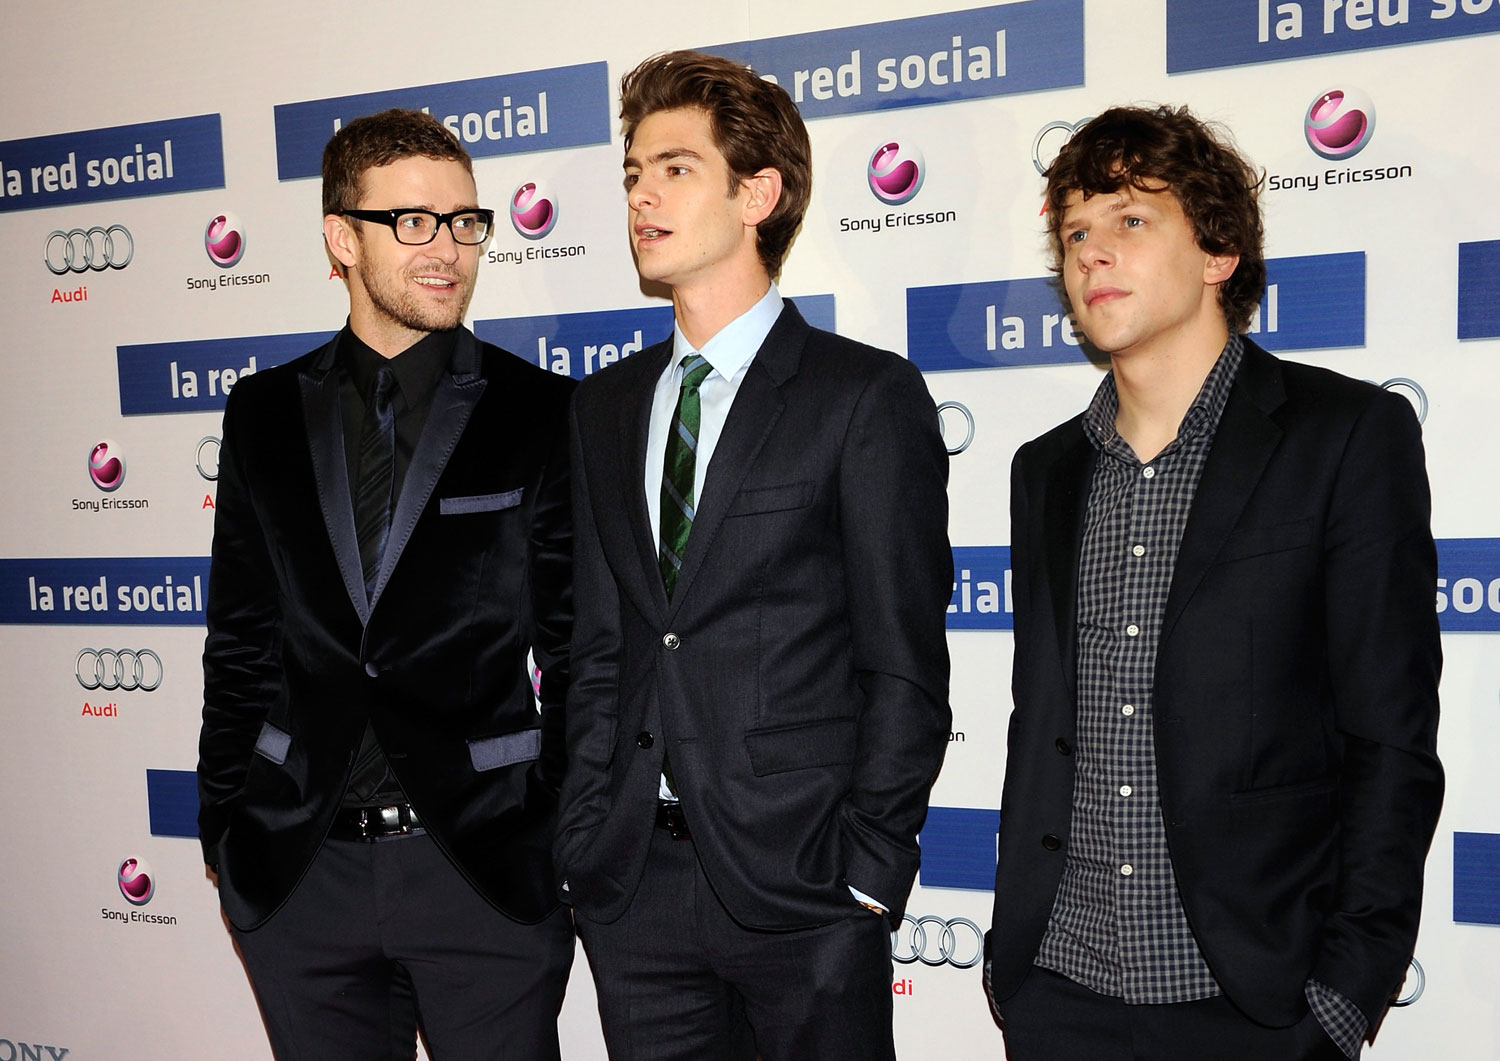 PHOTO: Left to right, Justin Timberlake, Andrew Garfield and Jesse Eisenberg attend "La Red Social" (The Social Network) premiere at the Proyecciones Cinema, Oct. 6, 2010, in Madrid.